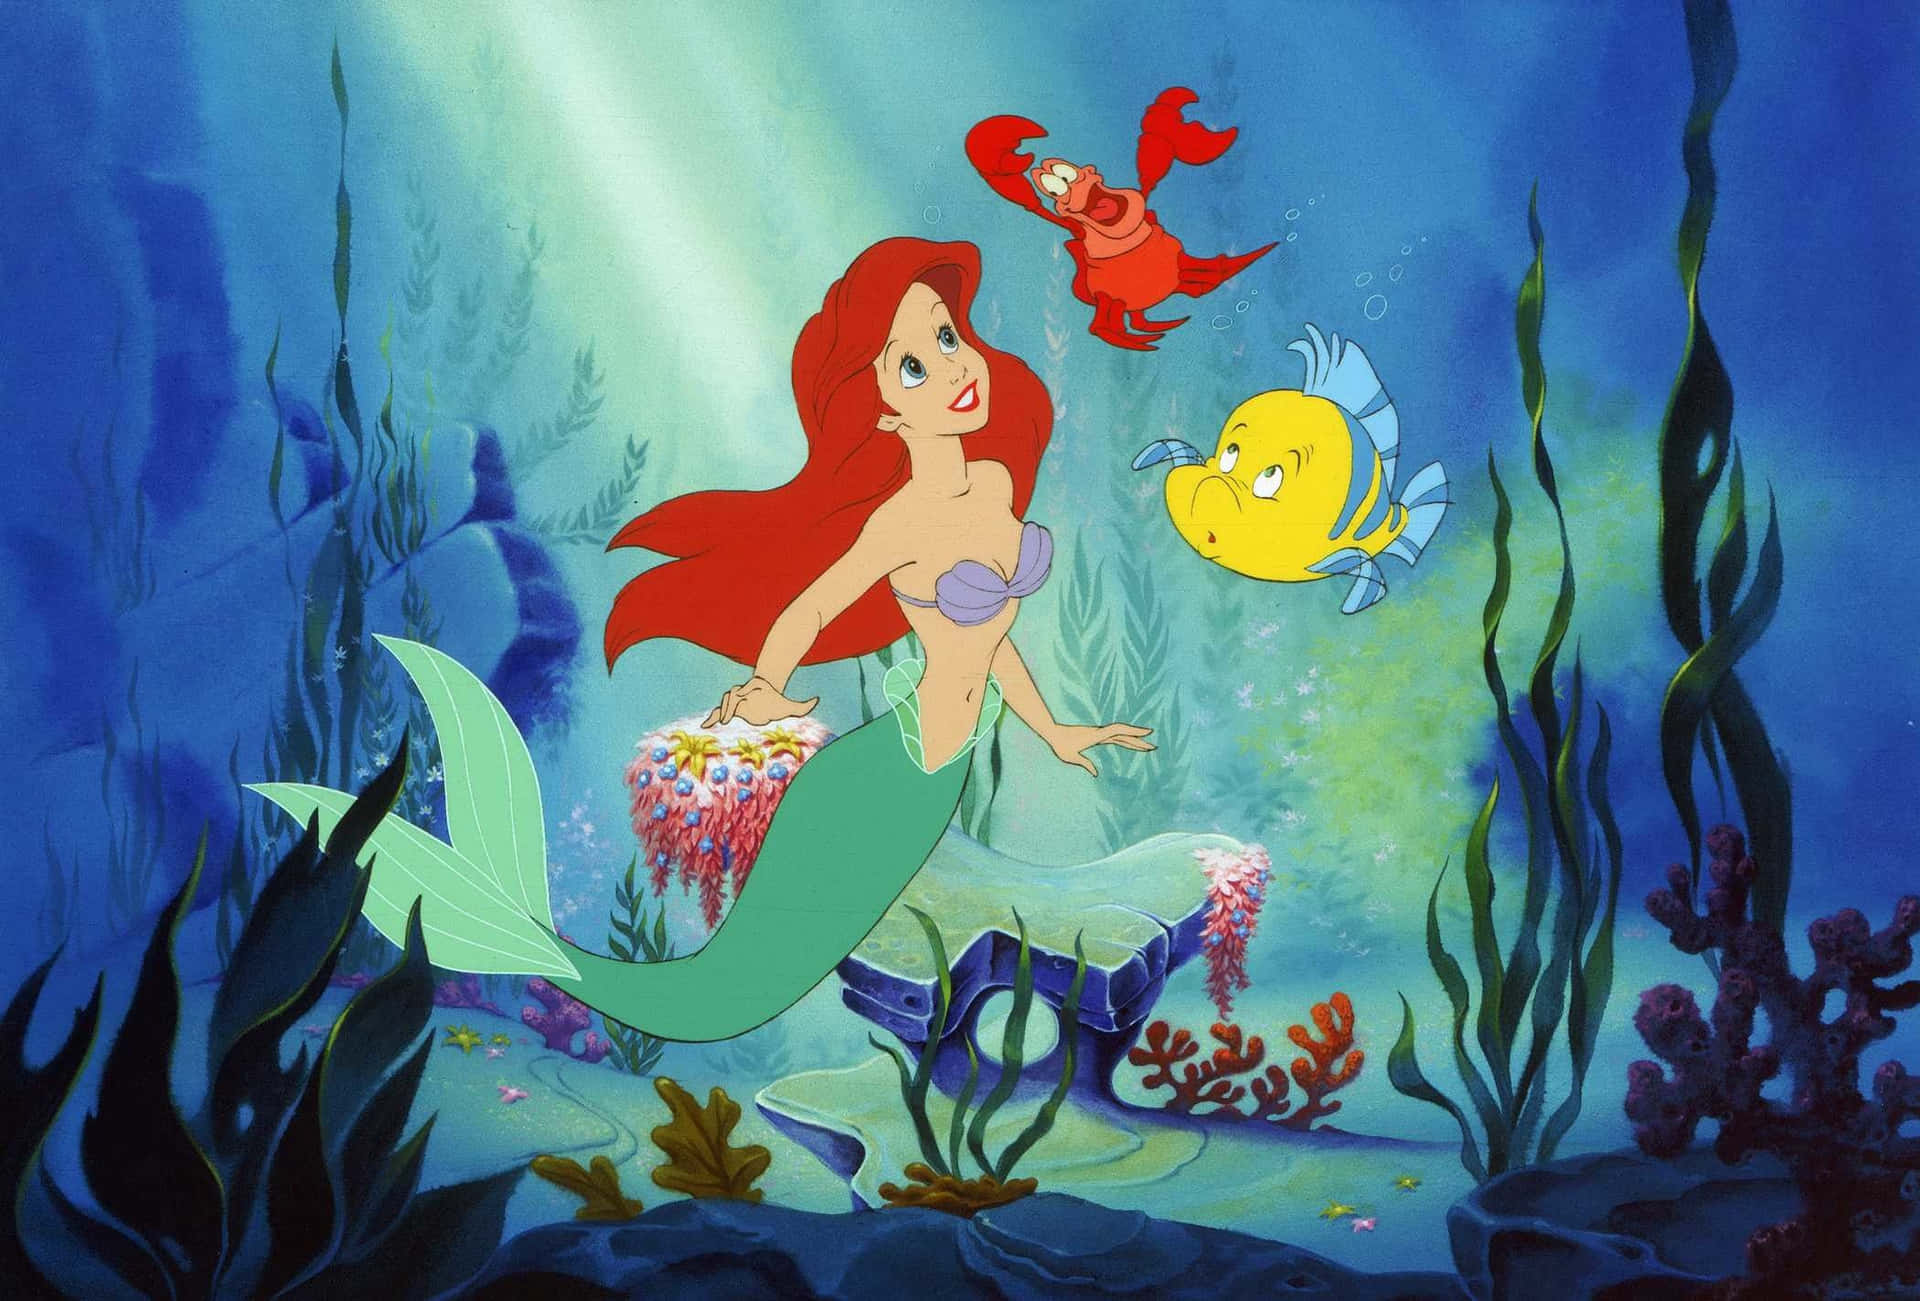 Dive into a world of adventure with Disney's The Little Mermaid